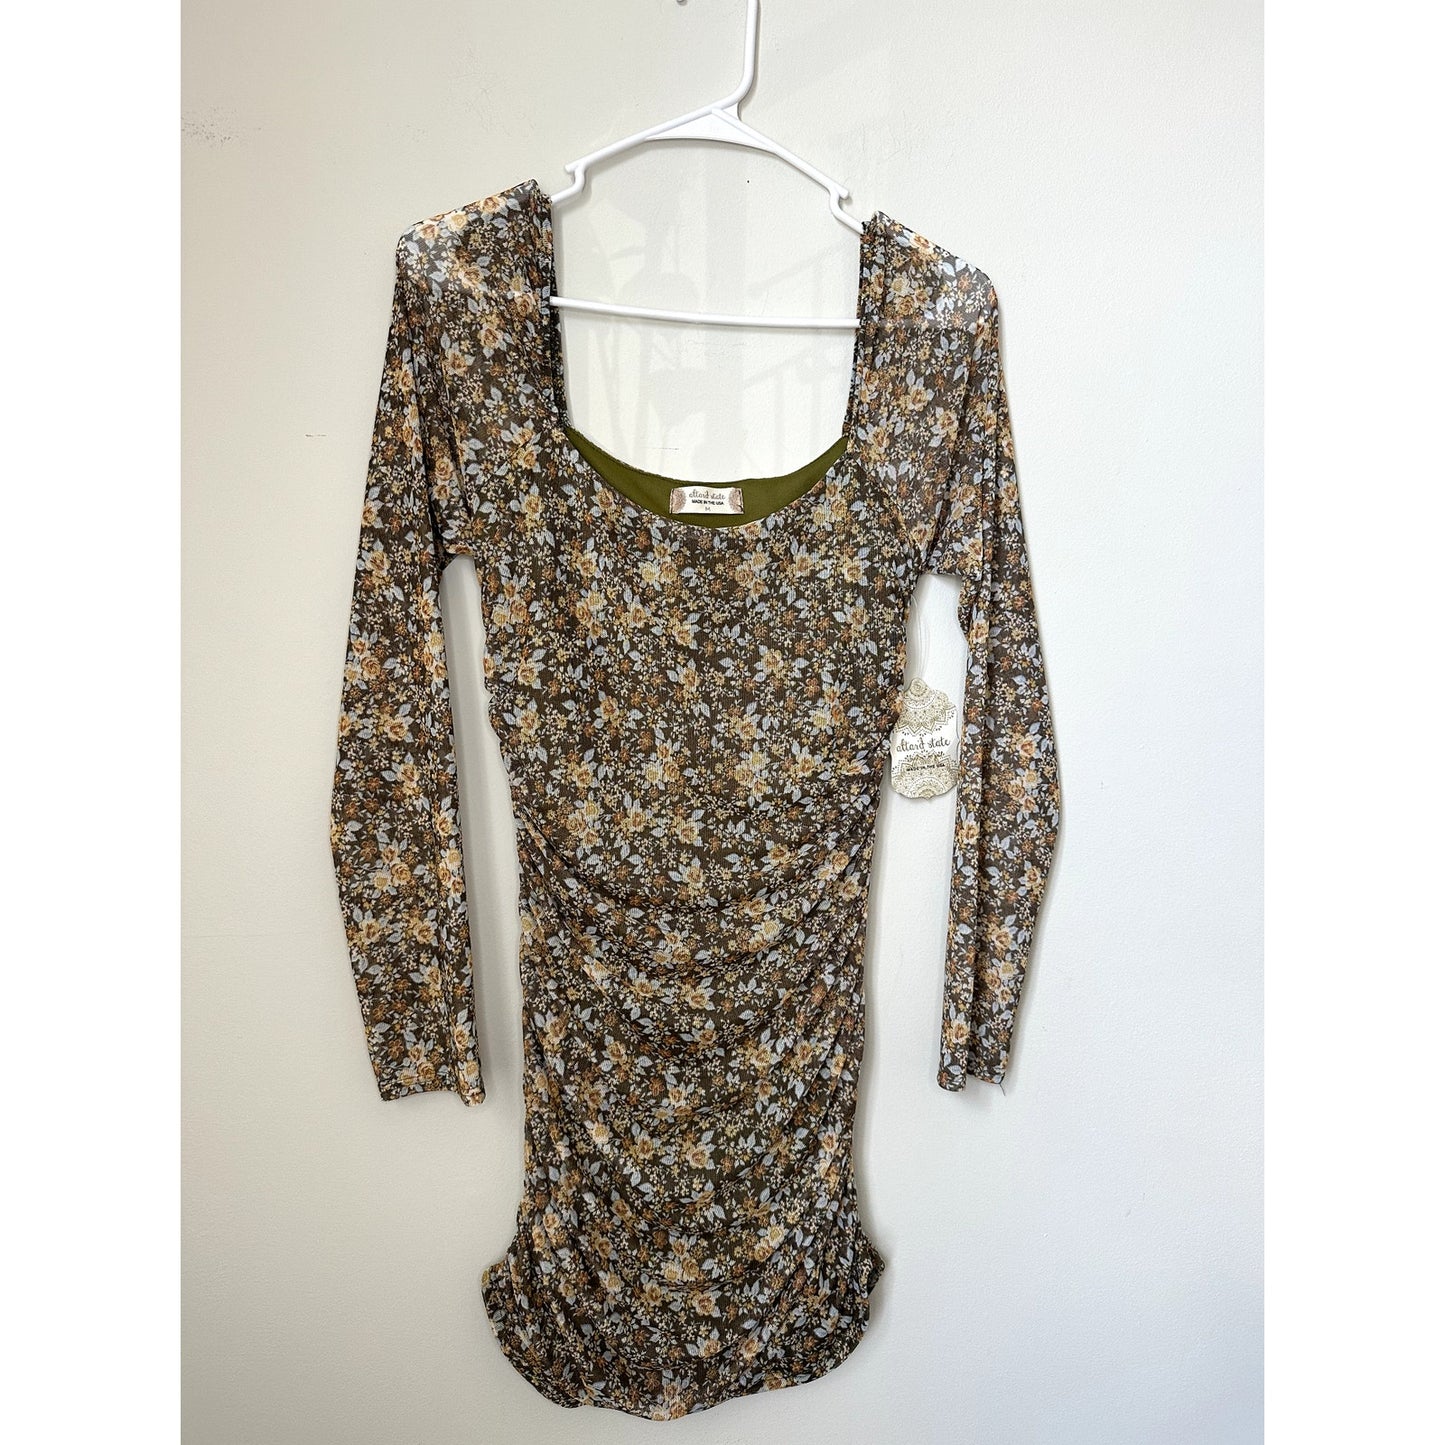 NWT Altar'd State Floral Long Sleeve Mini Dress, Size M